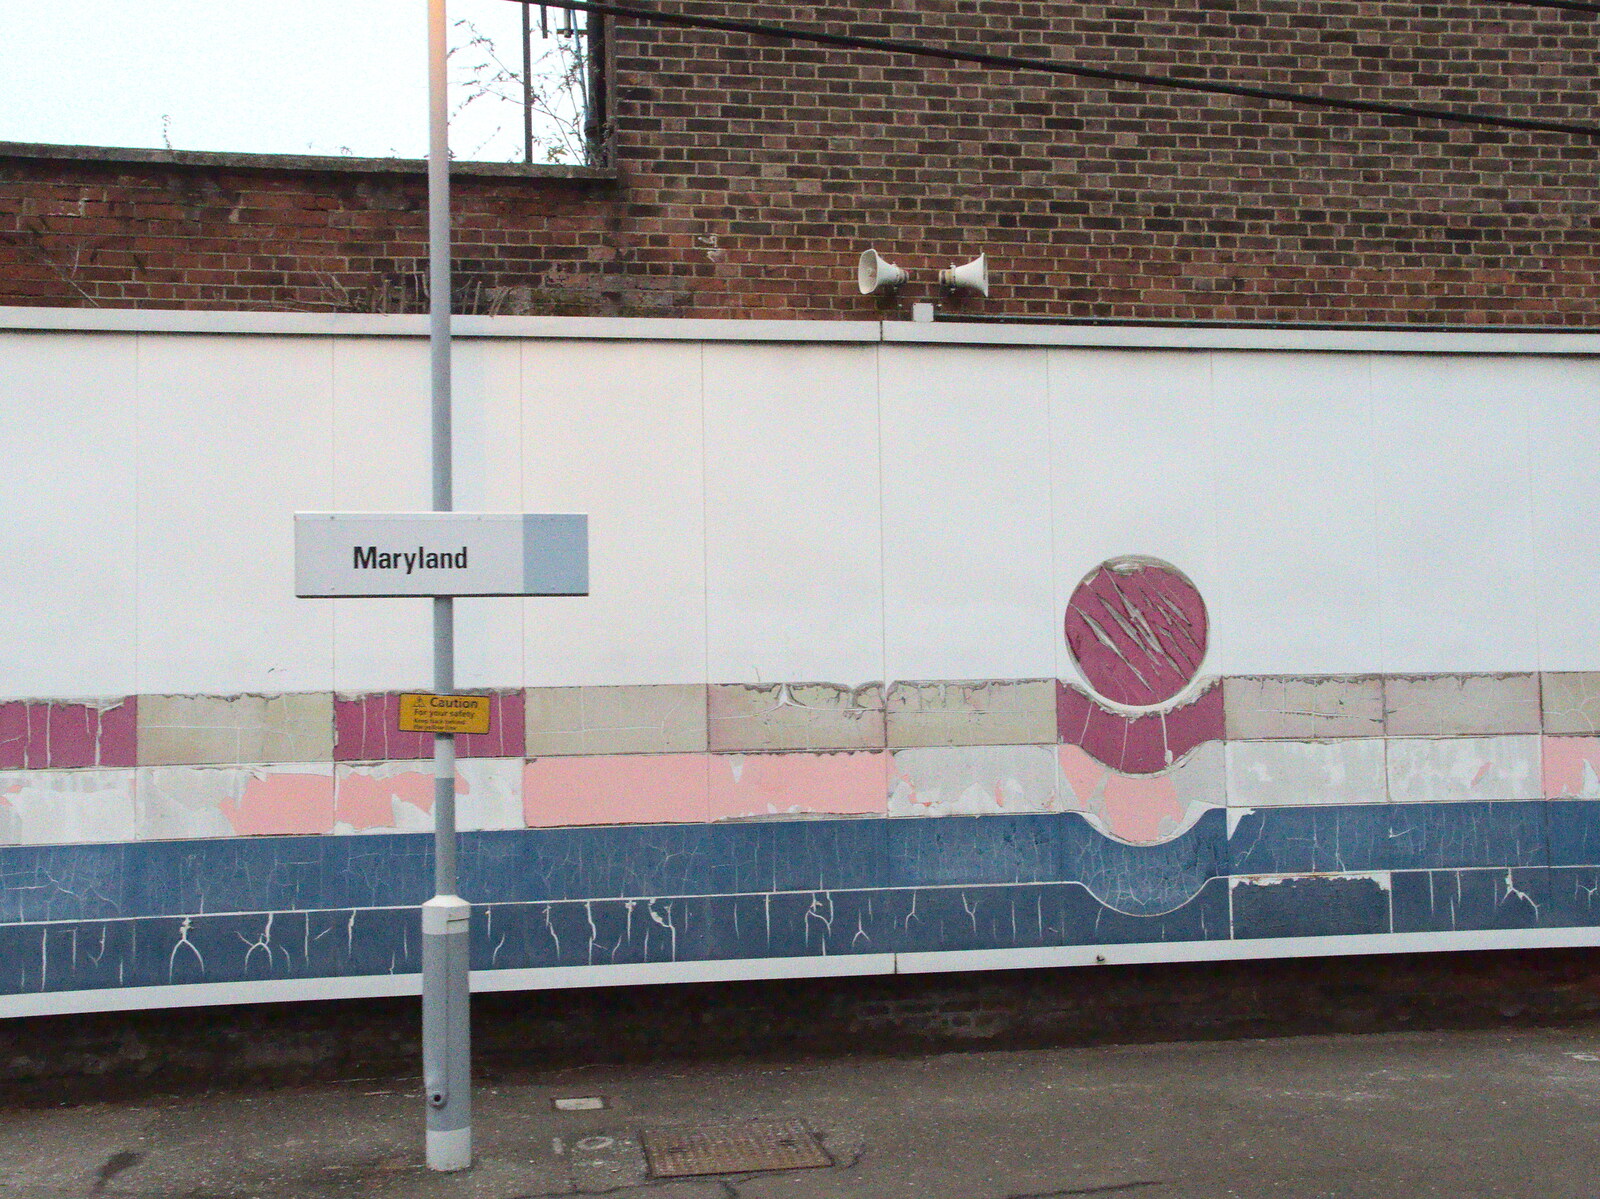 This hoarding at Maryland once looked modern from Fred and the Volcano, Brome, Suffolk - 8th February 2015